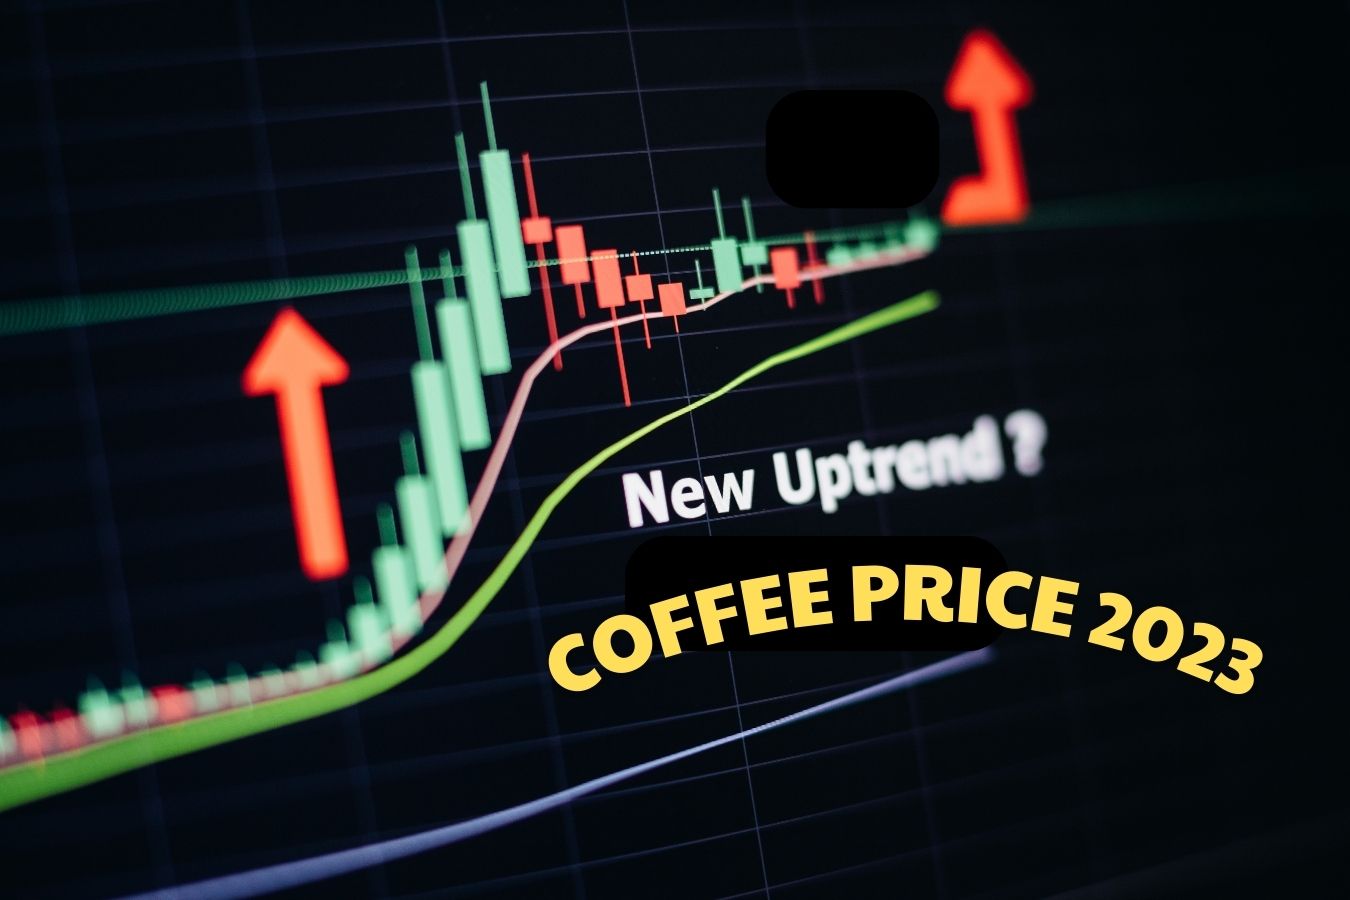 coffee-price-forecast-2023-global-coffee-production-forecast-to-increase-by-7-8-million-bags